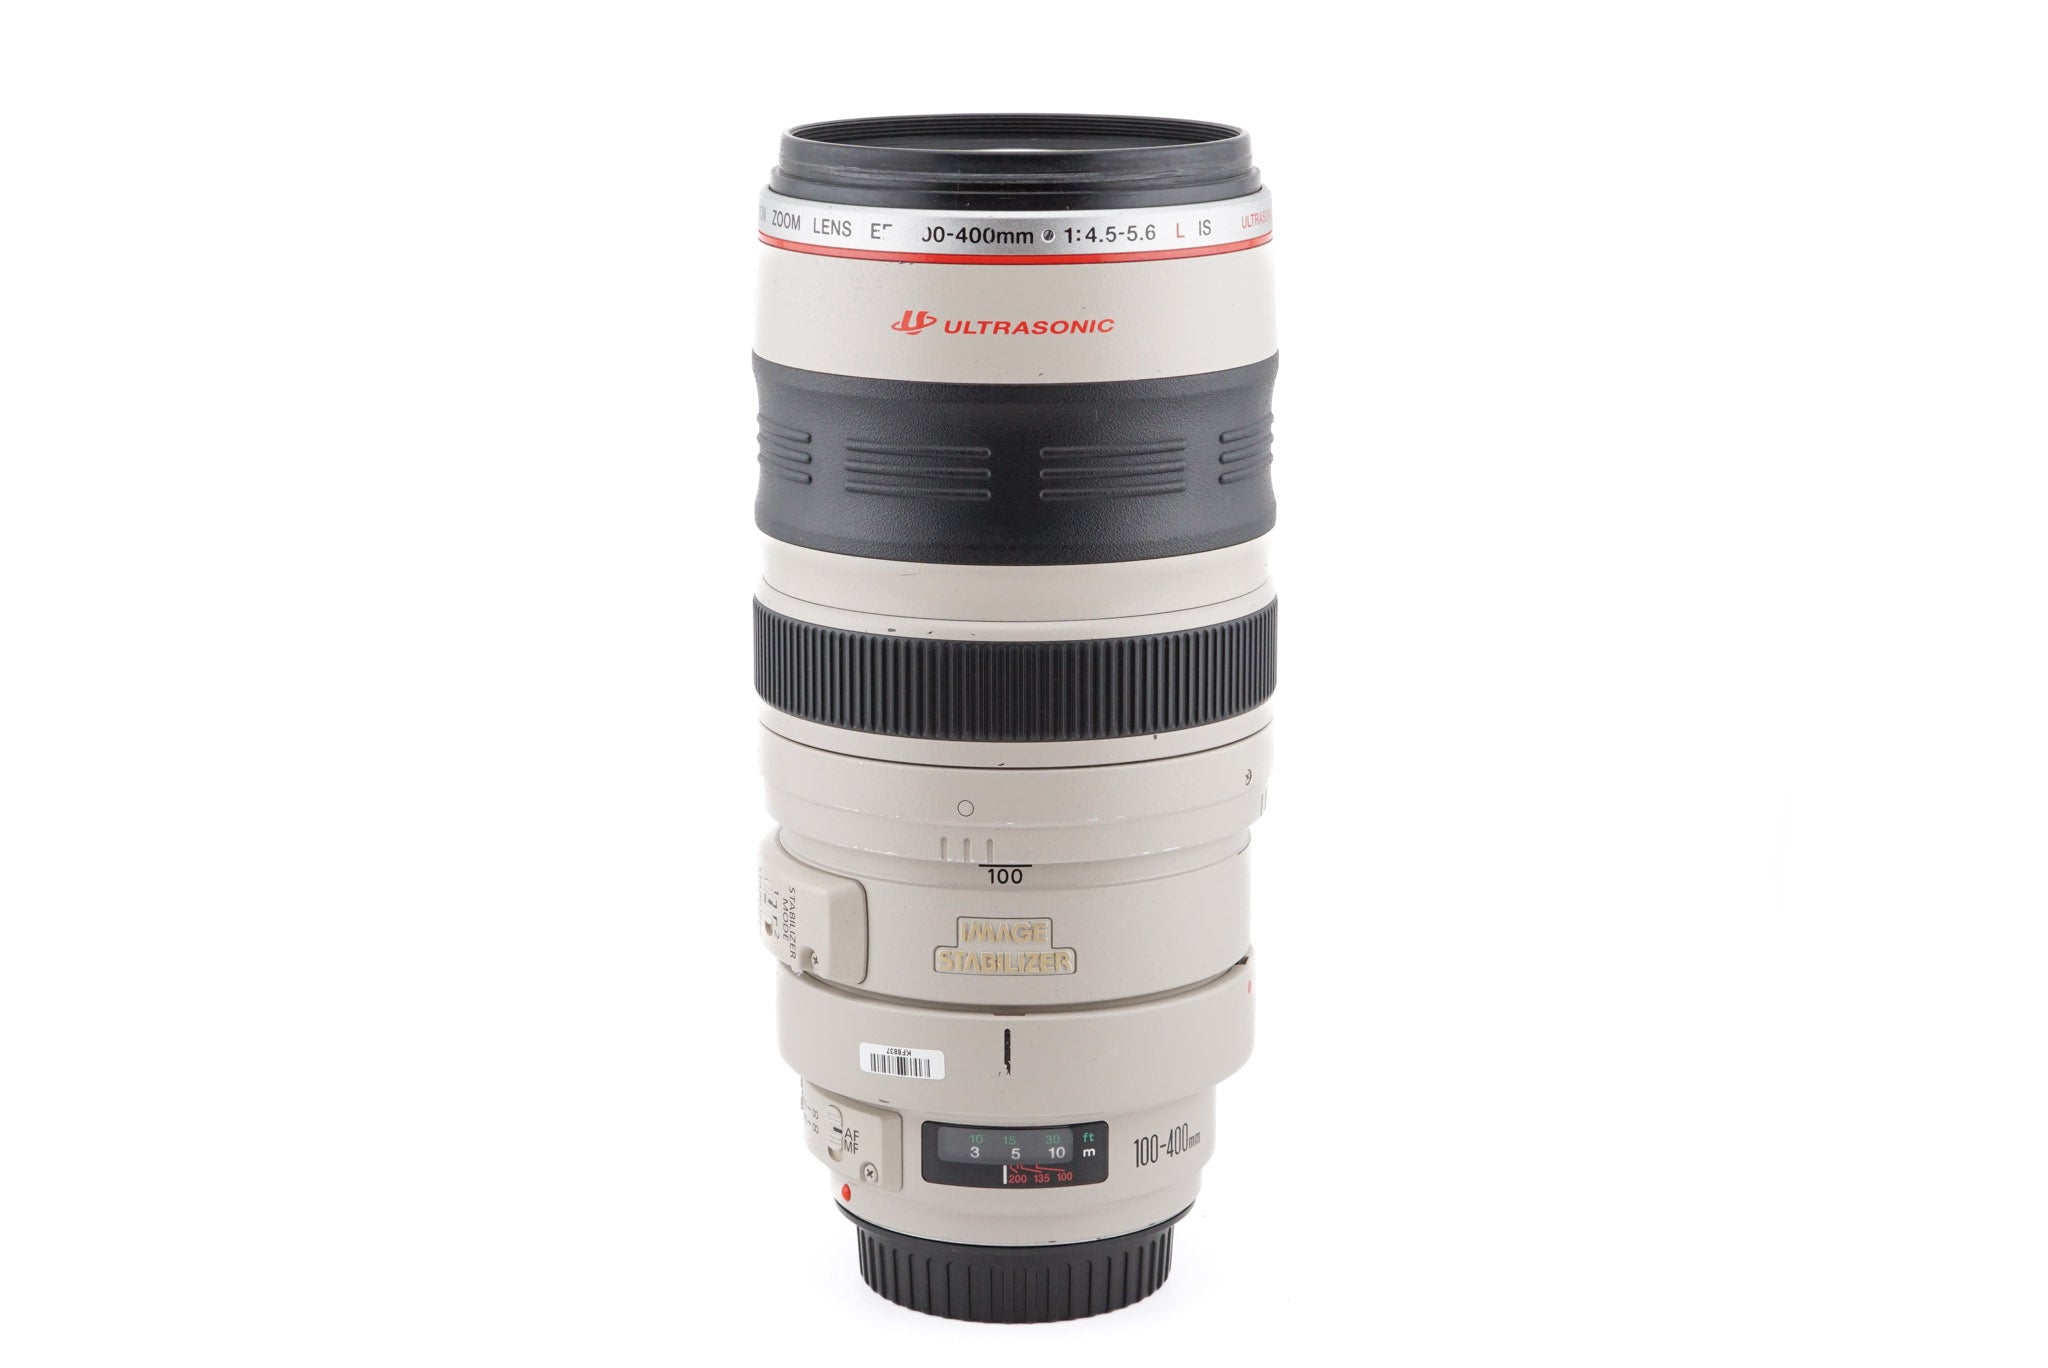 Canon 100-400mm f4.5-5.6 L IS USM - Lens